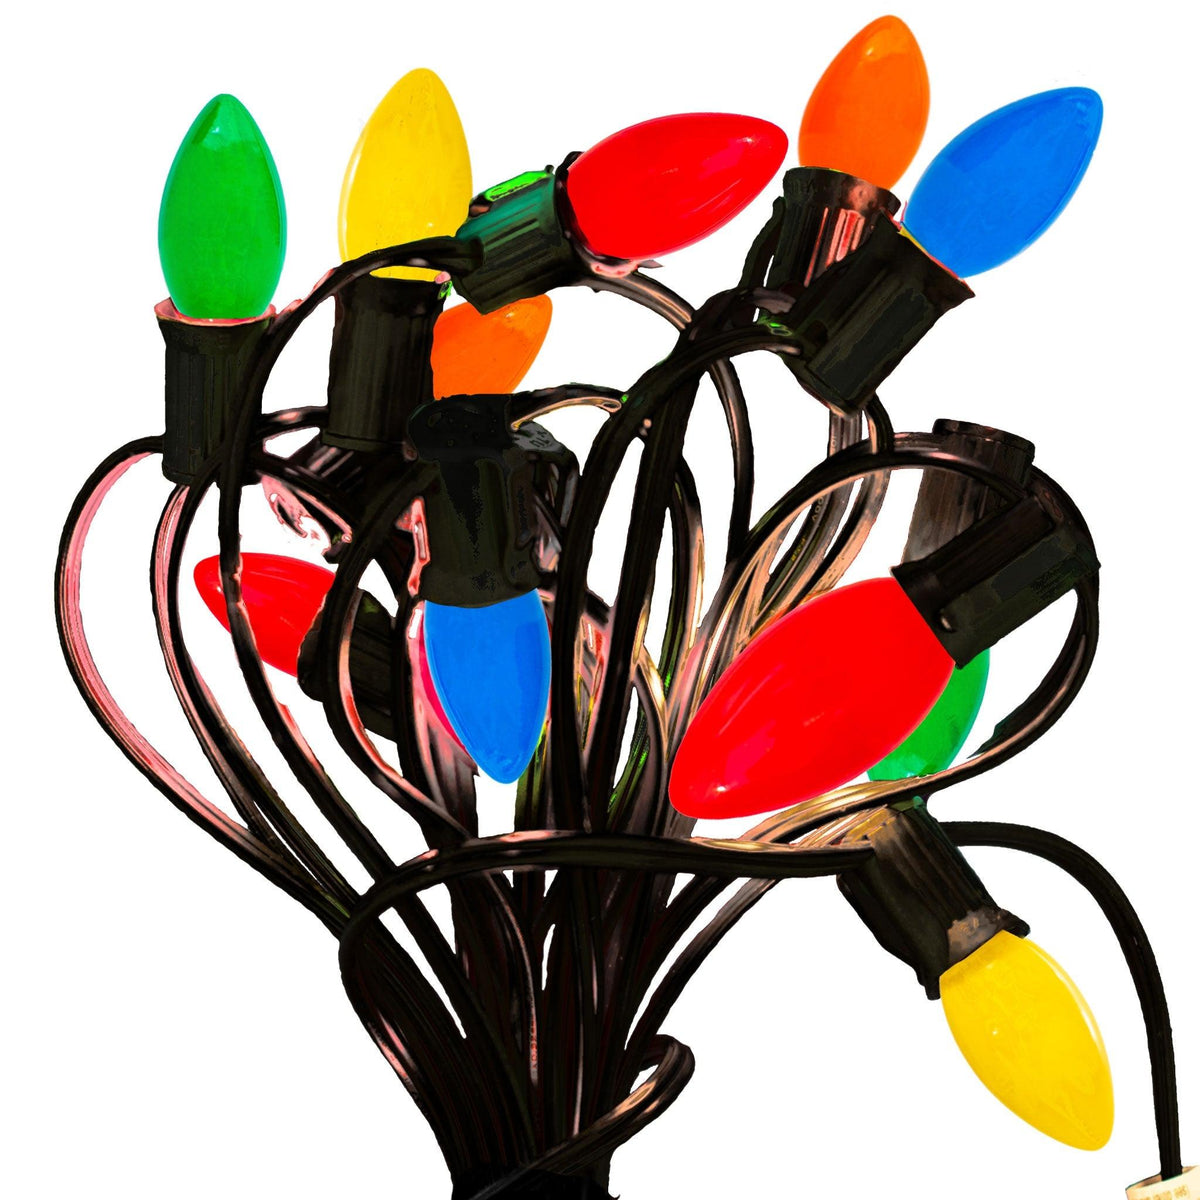 Lee Display offers your favorite Solid Ceramic Multi-Color Christmas Lights sold with a 25FT Black Patio String Cord in a set